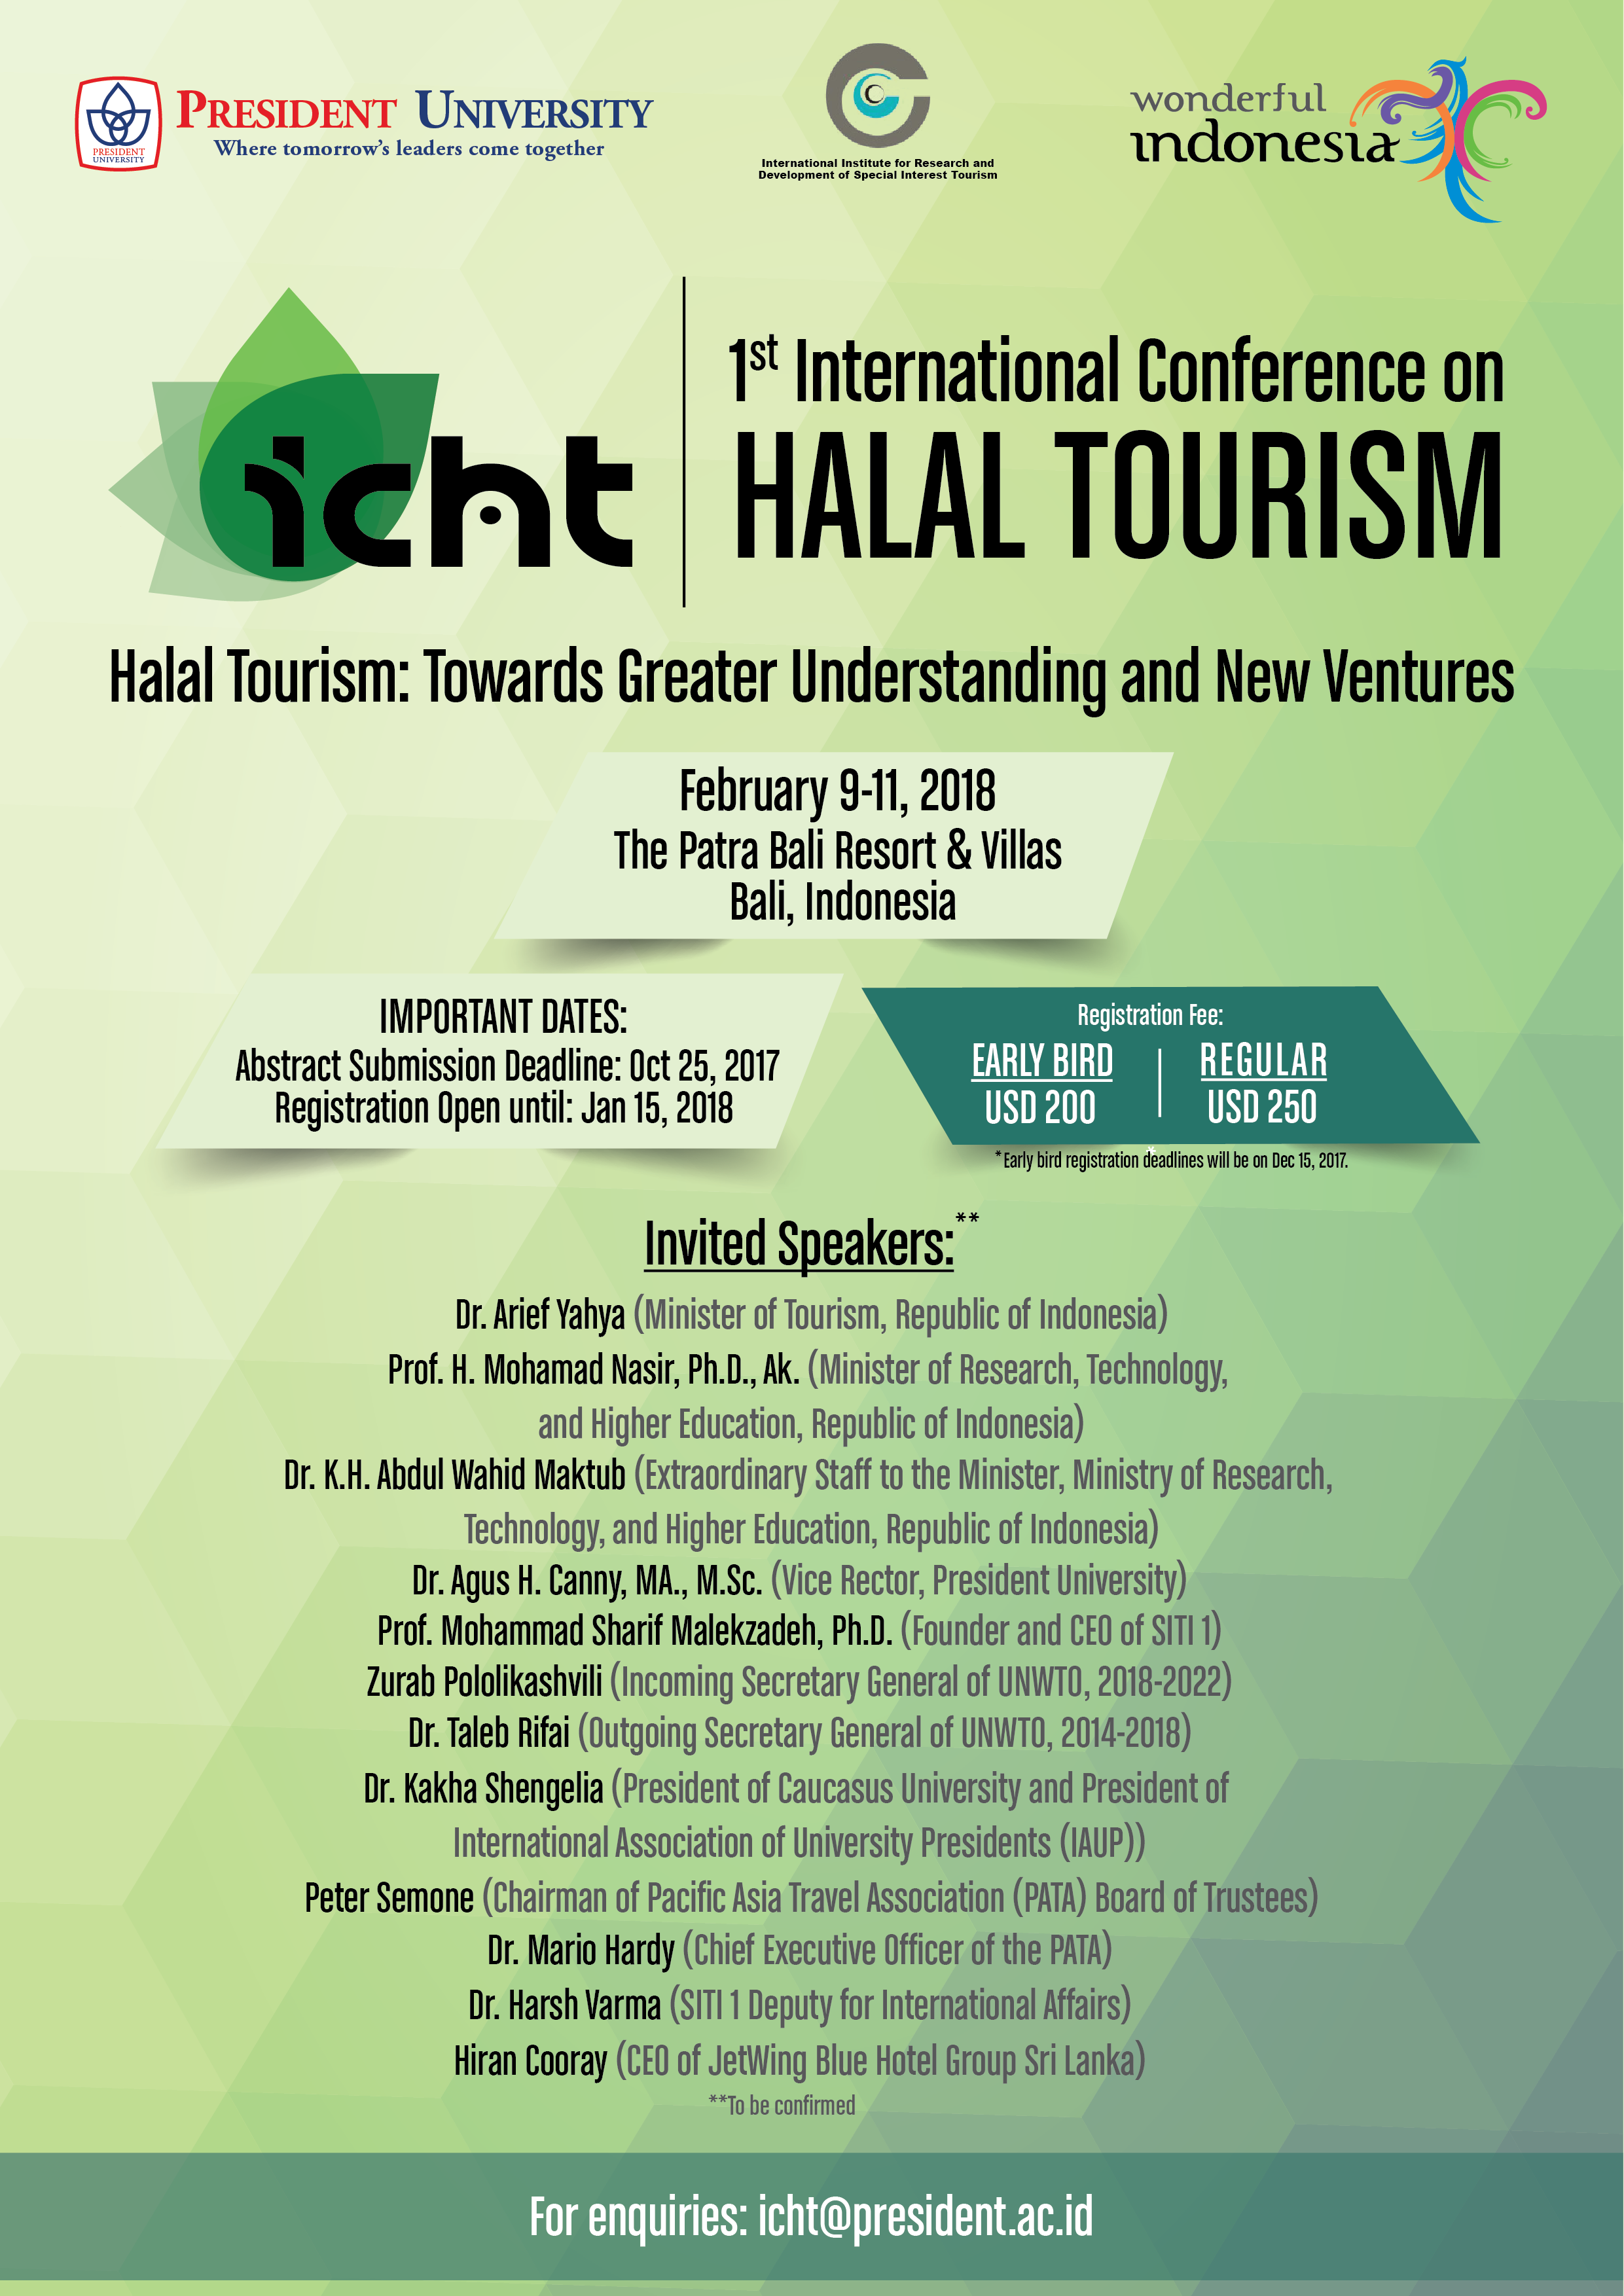 This conference aims to gather researchers, practitioners, and decision makers to critically share and discuss the latest empirical, conceptual, as well as theoretical findings and trends in the field of halal tourism industry and the industries supporting it.